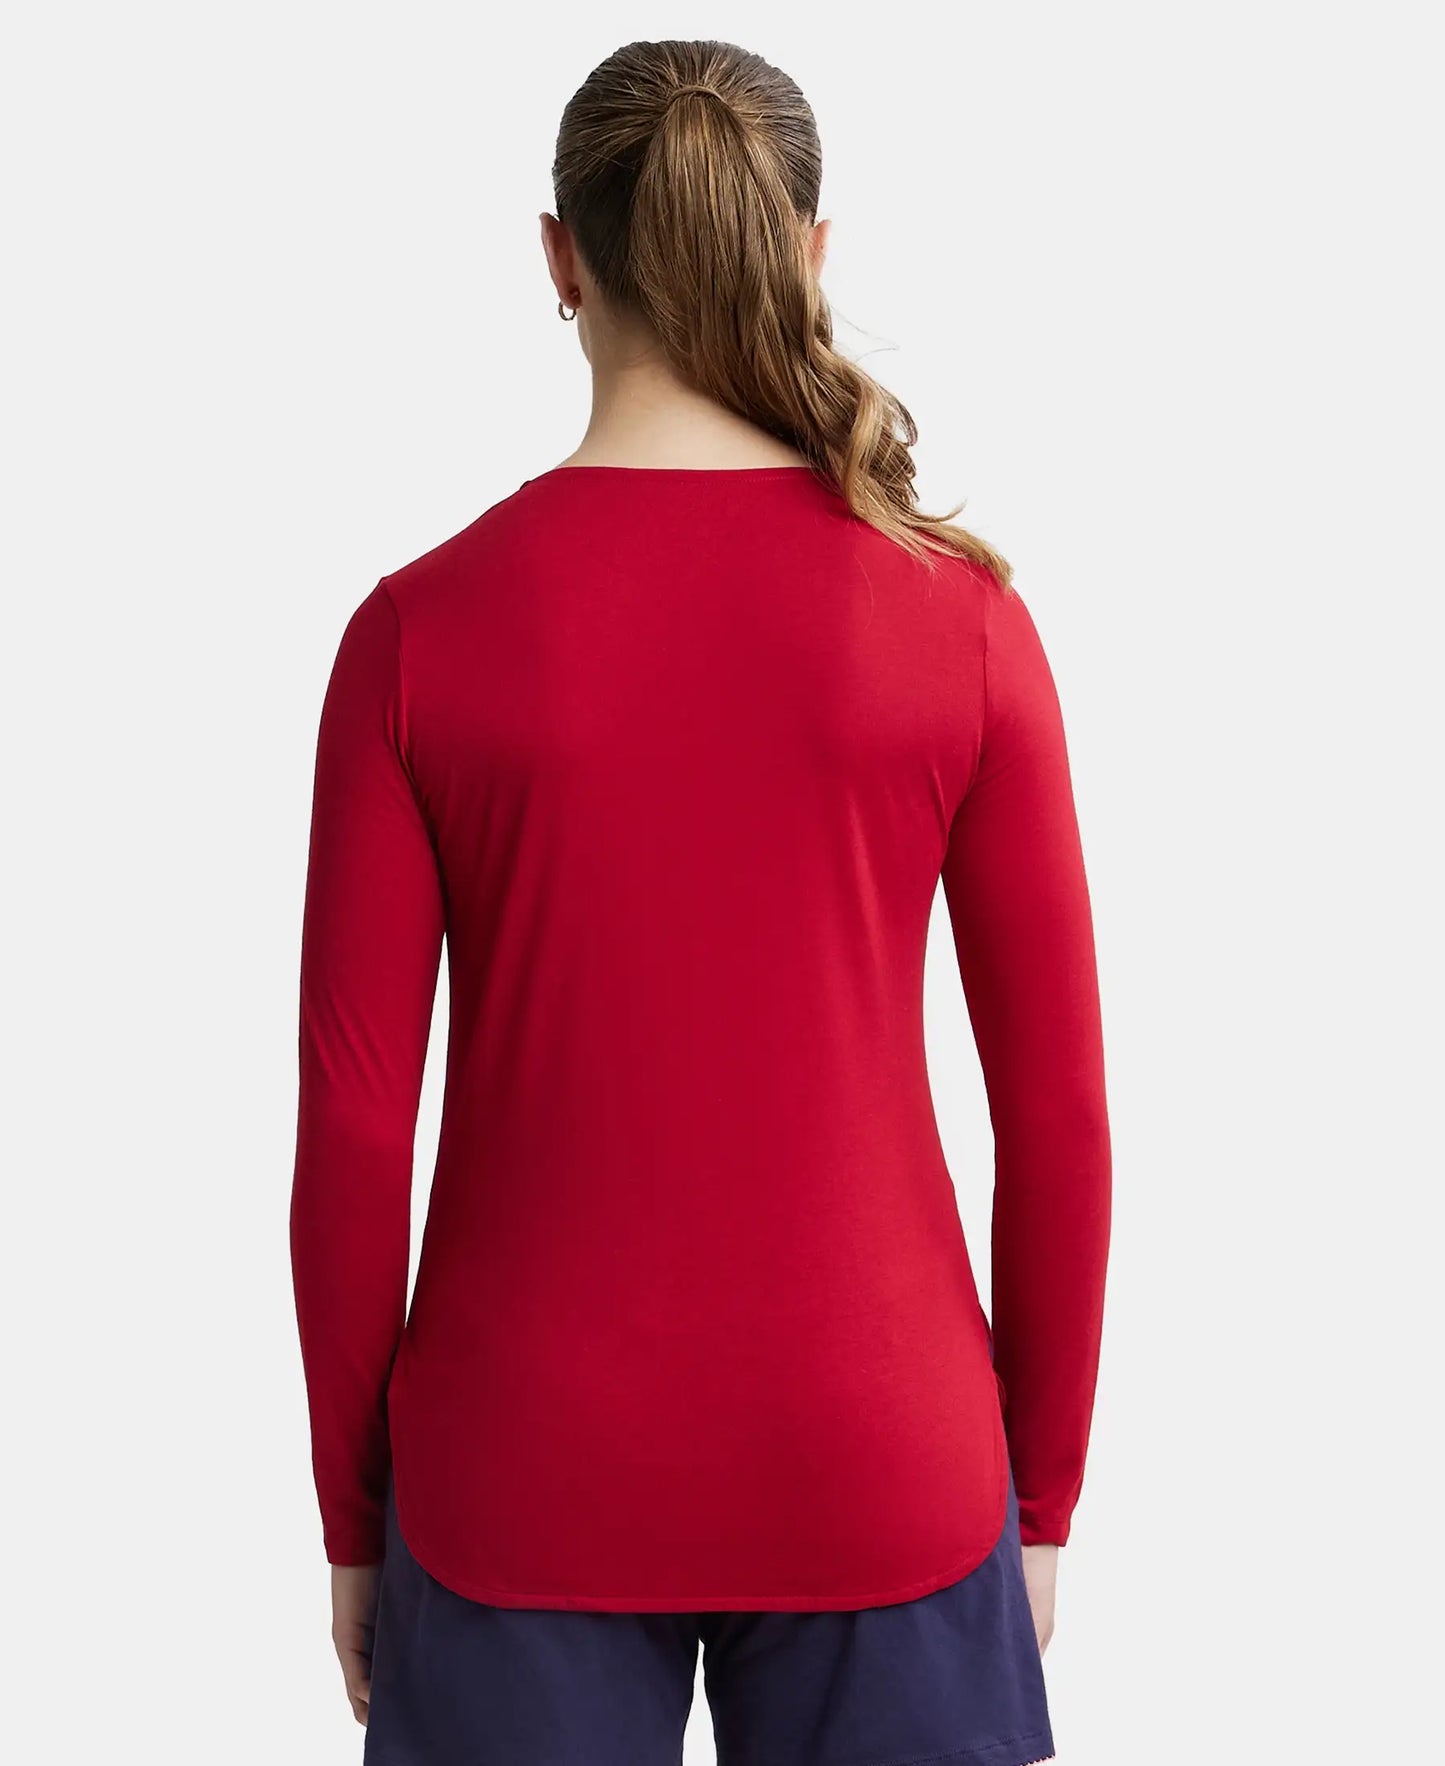 Micro Modal Cotton Relaxed Fit Solid Round Neck Full Sleeve T-Shirt with Curved Hem Styling - Jester Red-3